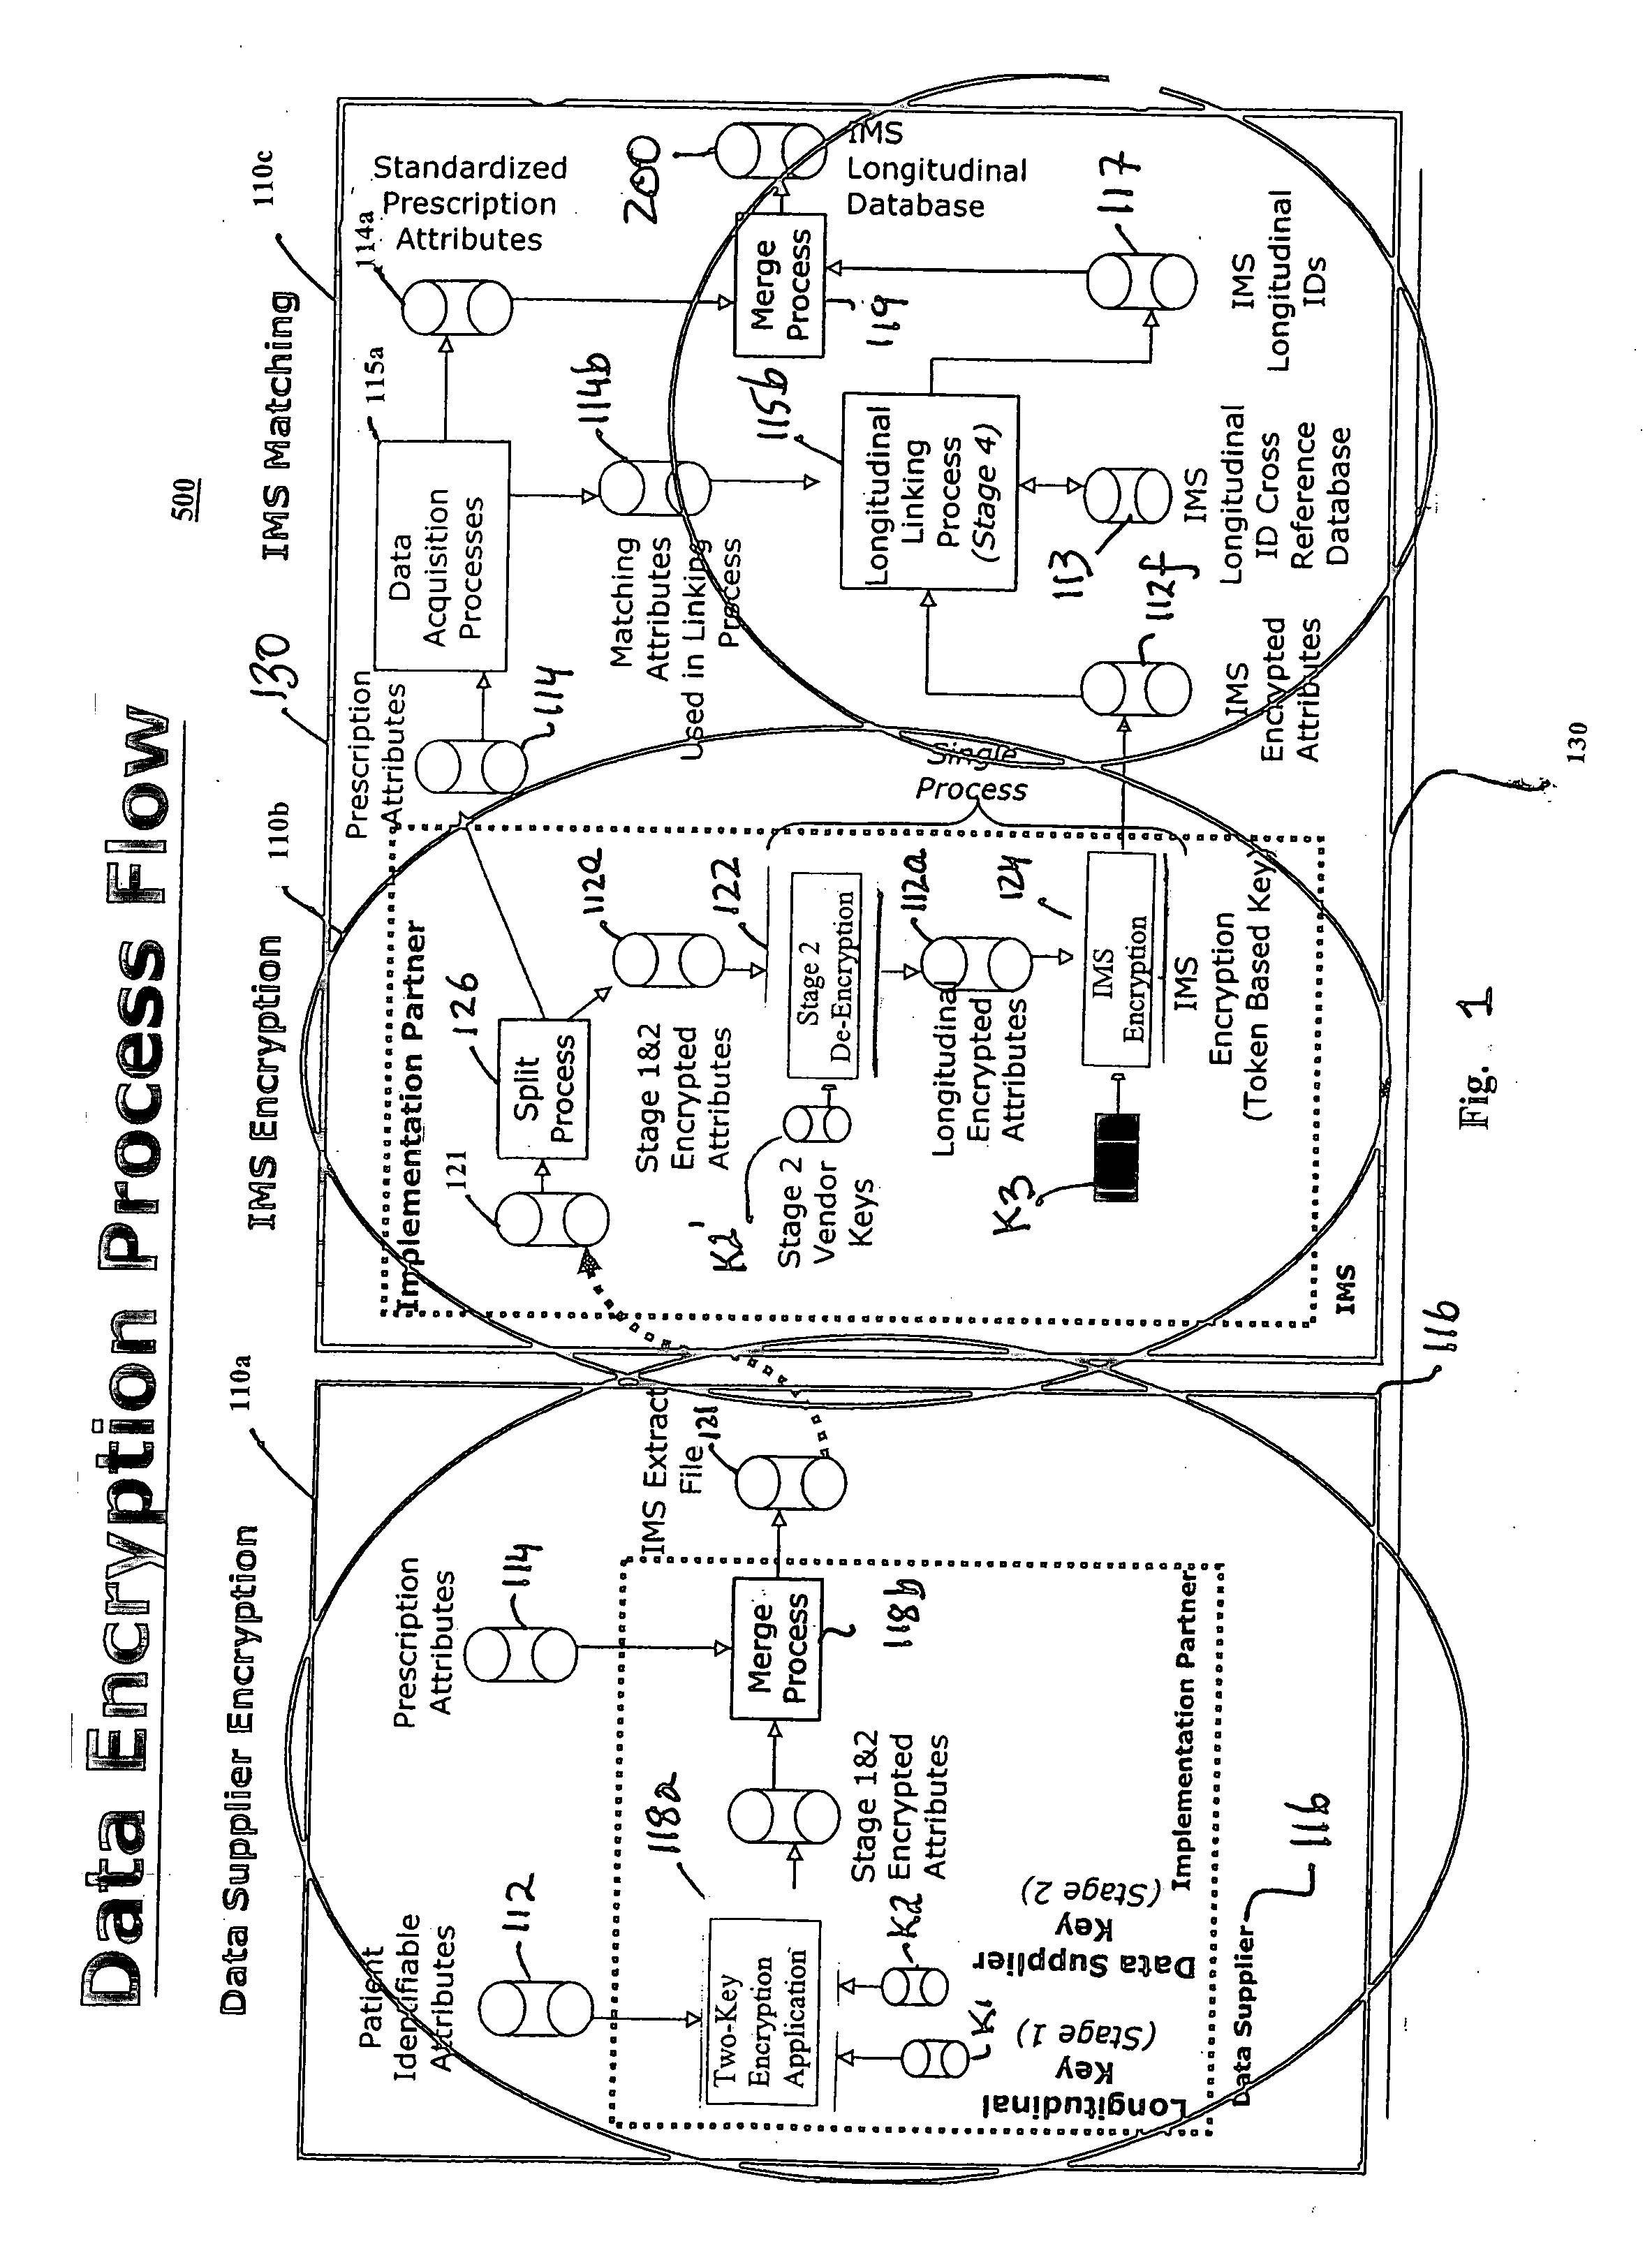 Method for linking de-identified patients using encrypted and unencrypted demographic and healthcare information from multiple data sources